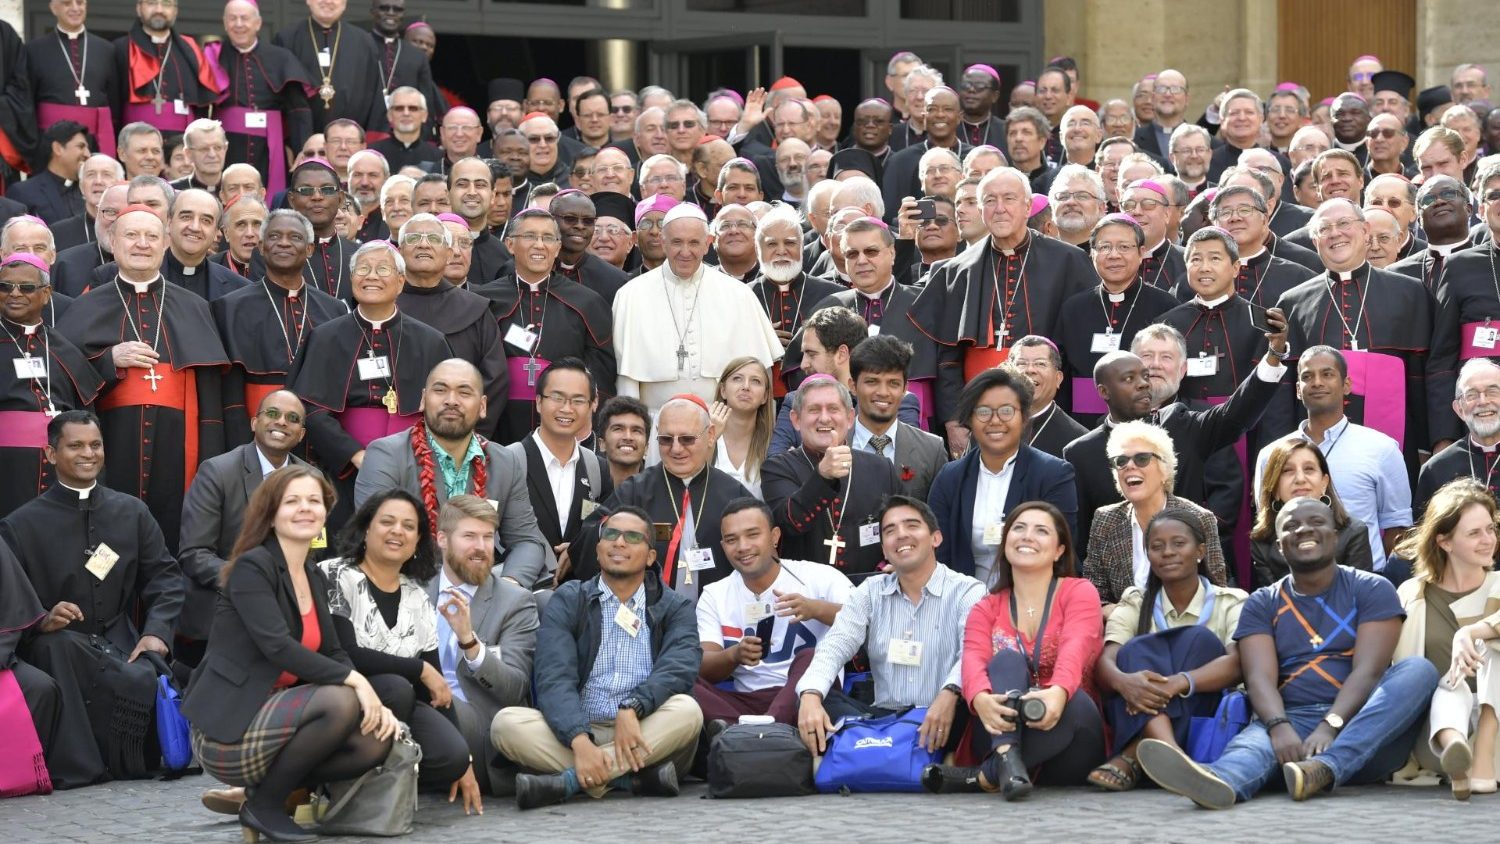 The Synod on Young People: What does the Final Document Say? - Vatican News